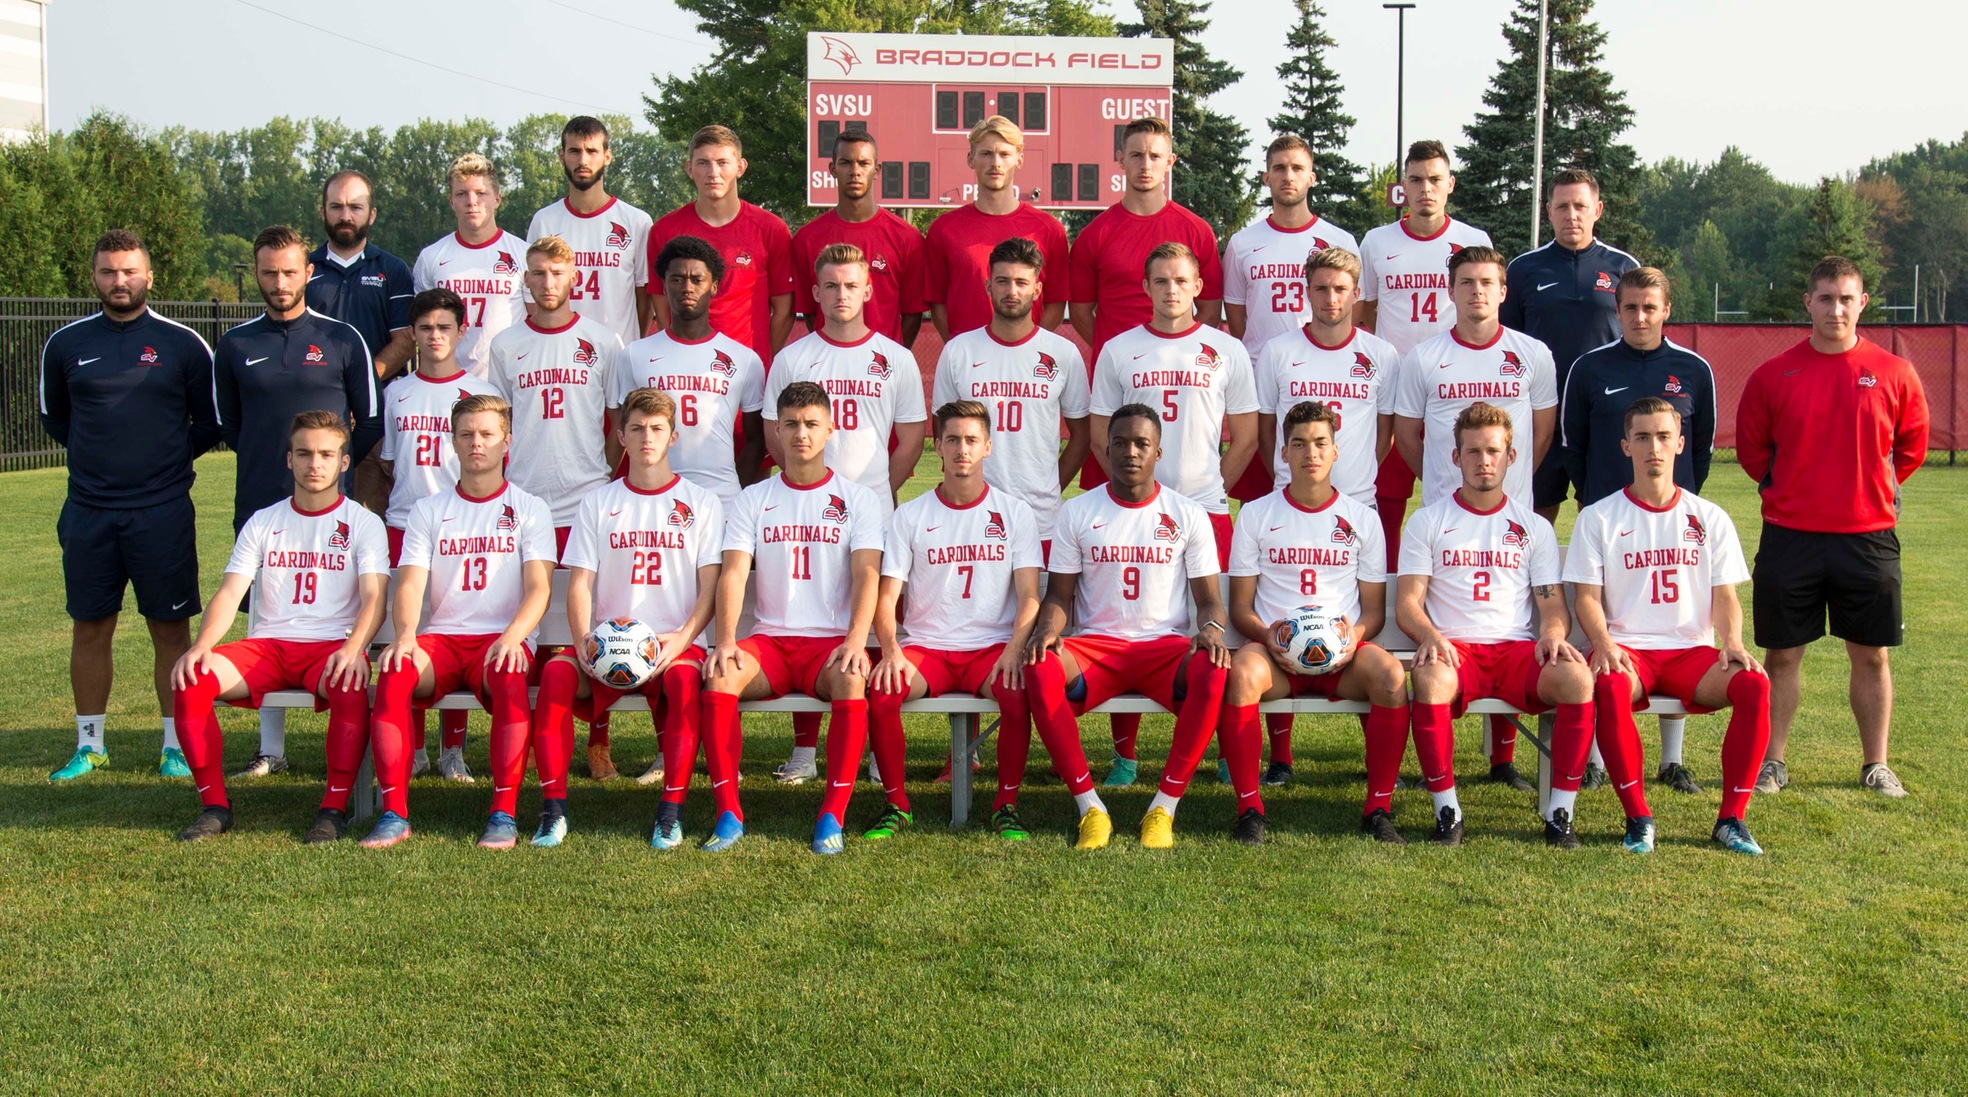 Cardinals to face Ashland in NCAA Division II Tournament's First Round